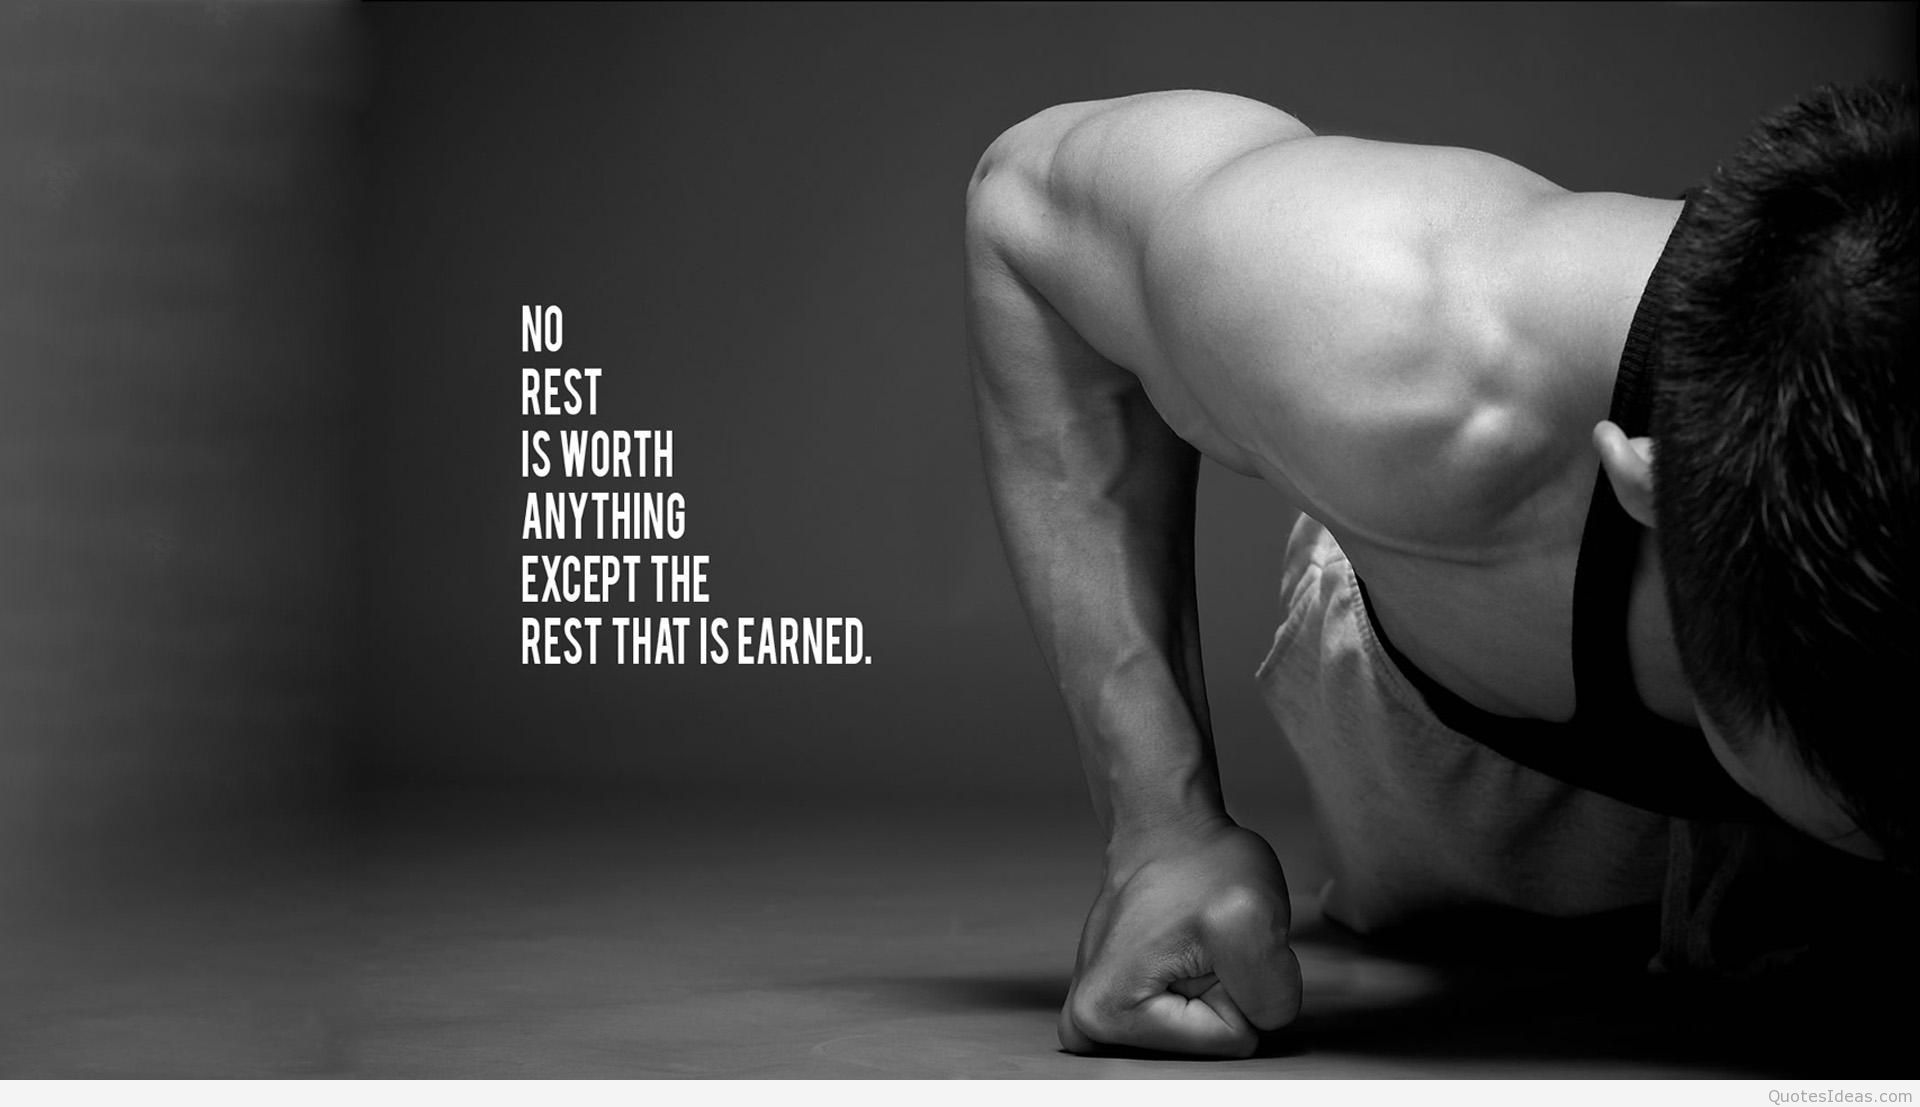 Fitness wallpaper with quote